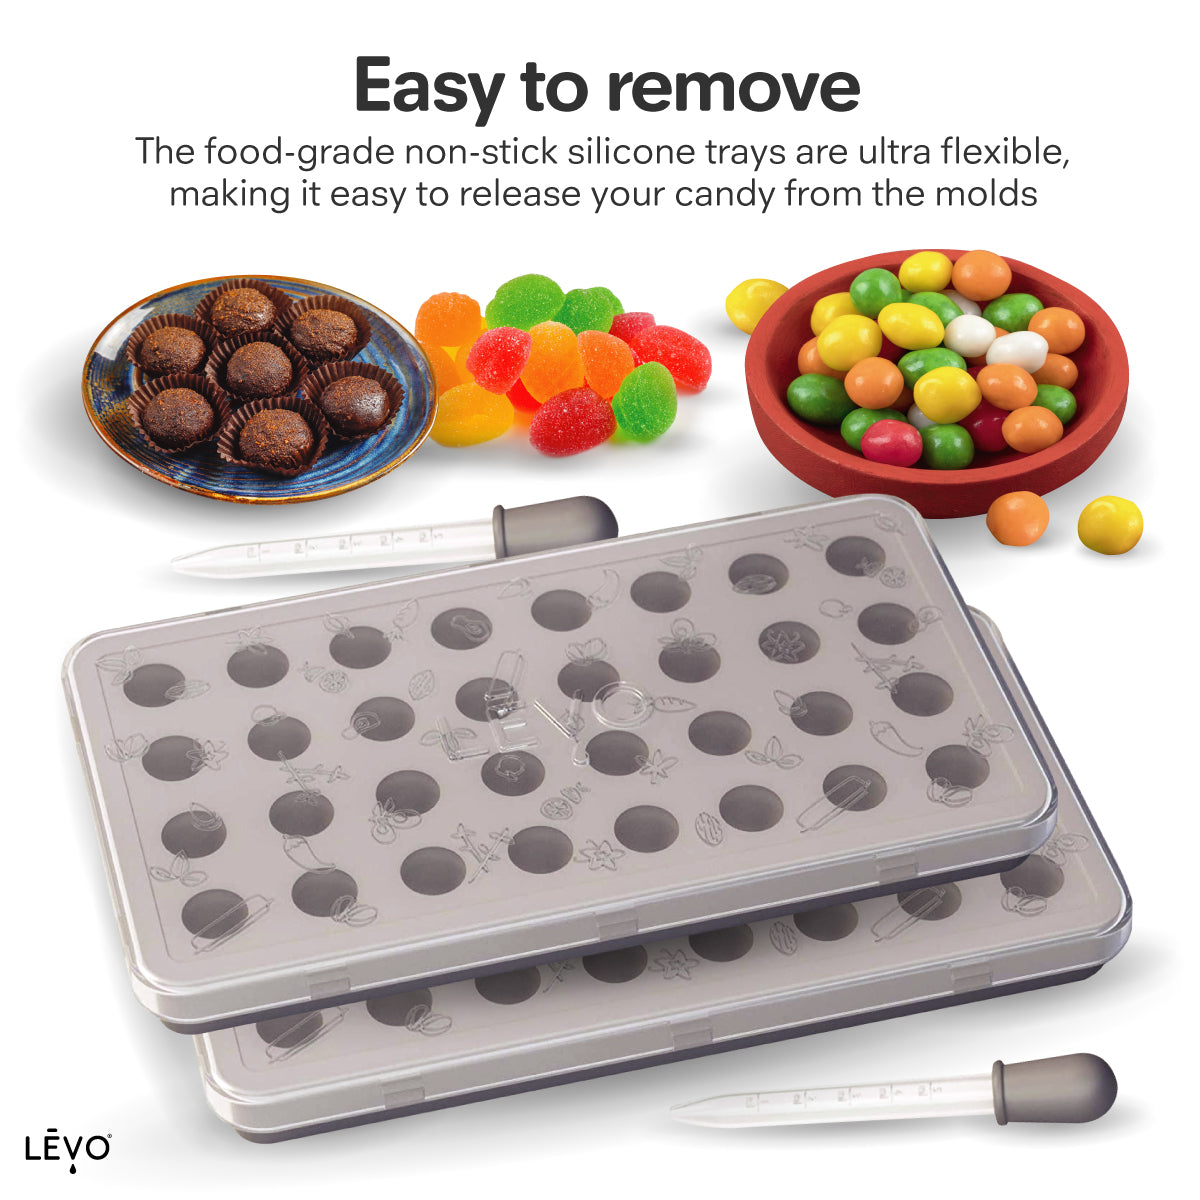 LEVO Gummy and candy molds to make your own infused edible gummies DIY at home.